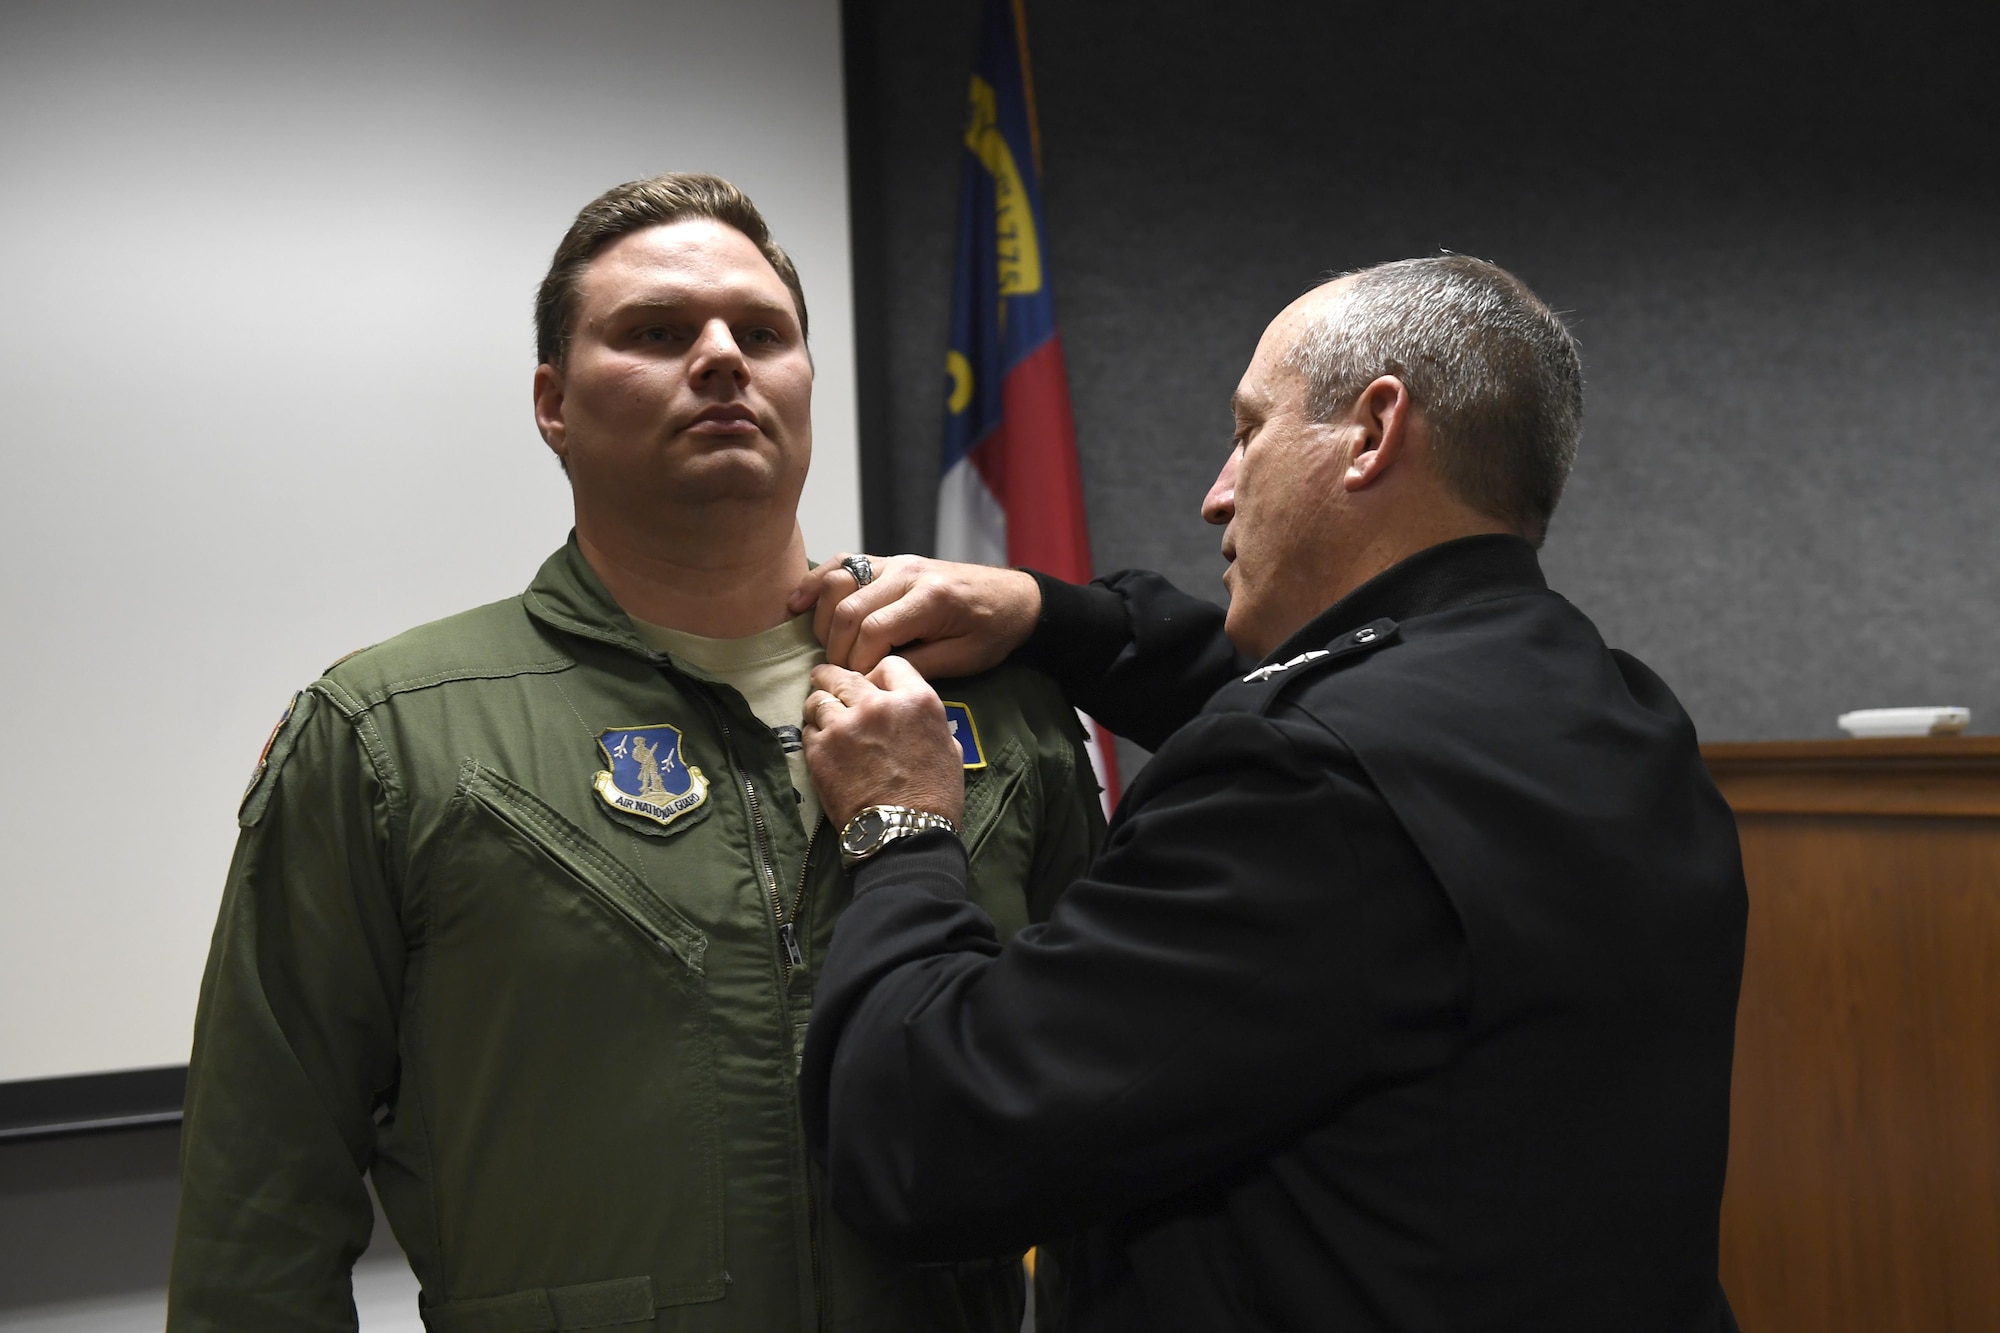 U.S. Army Maj. Gen. Greg Lusk (center), the Adjutant General of North Carolina, commander of the North Carolina National Guard, pins the North Carolina National Guard Soldier and Airman Medal for heroism onto U.S. Air Force Maj. Nathan Barron (left), 156th Airlift Wing, during a ceremony held at the North Carolina Air National Guard Base, Charlotte Douglas International Airport, April 1, 2017. Barron acted decisively and courageously by tackling and maneuvering an unruly passenger to the ground after he assaulted a flight attendant. Barron continued to subdue the passenger until law enforcement arrived which saved the lives of the crew as well as others aboard the plane. The medal was recently created to honor Soldiers and Airmen for heroic actions performed while out of the military uniform.